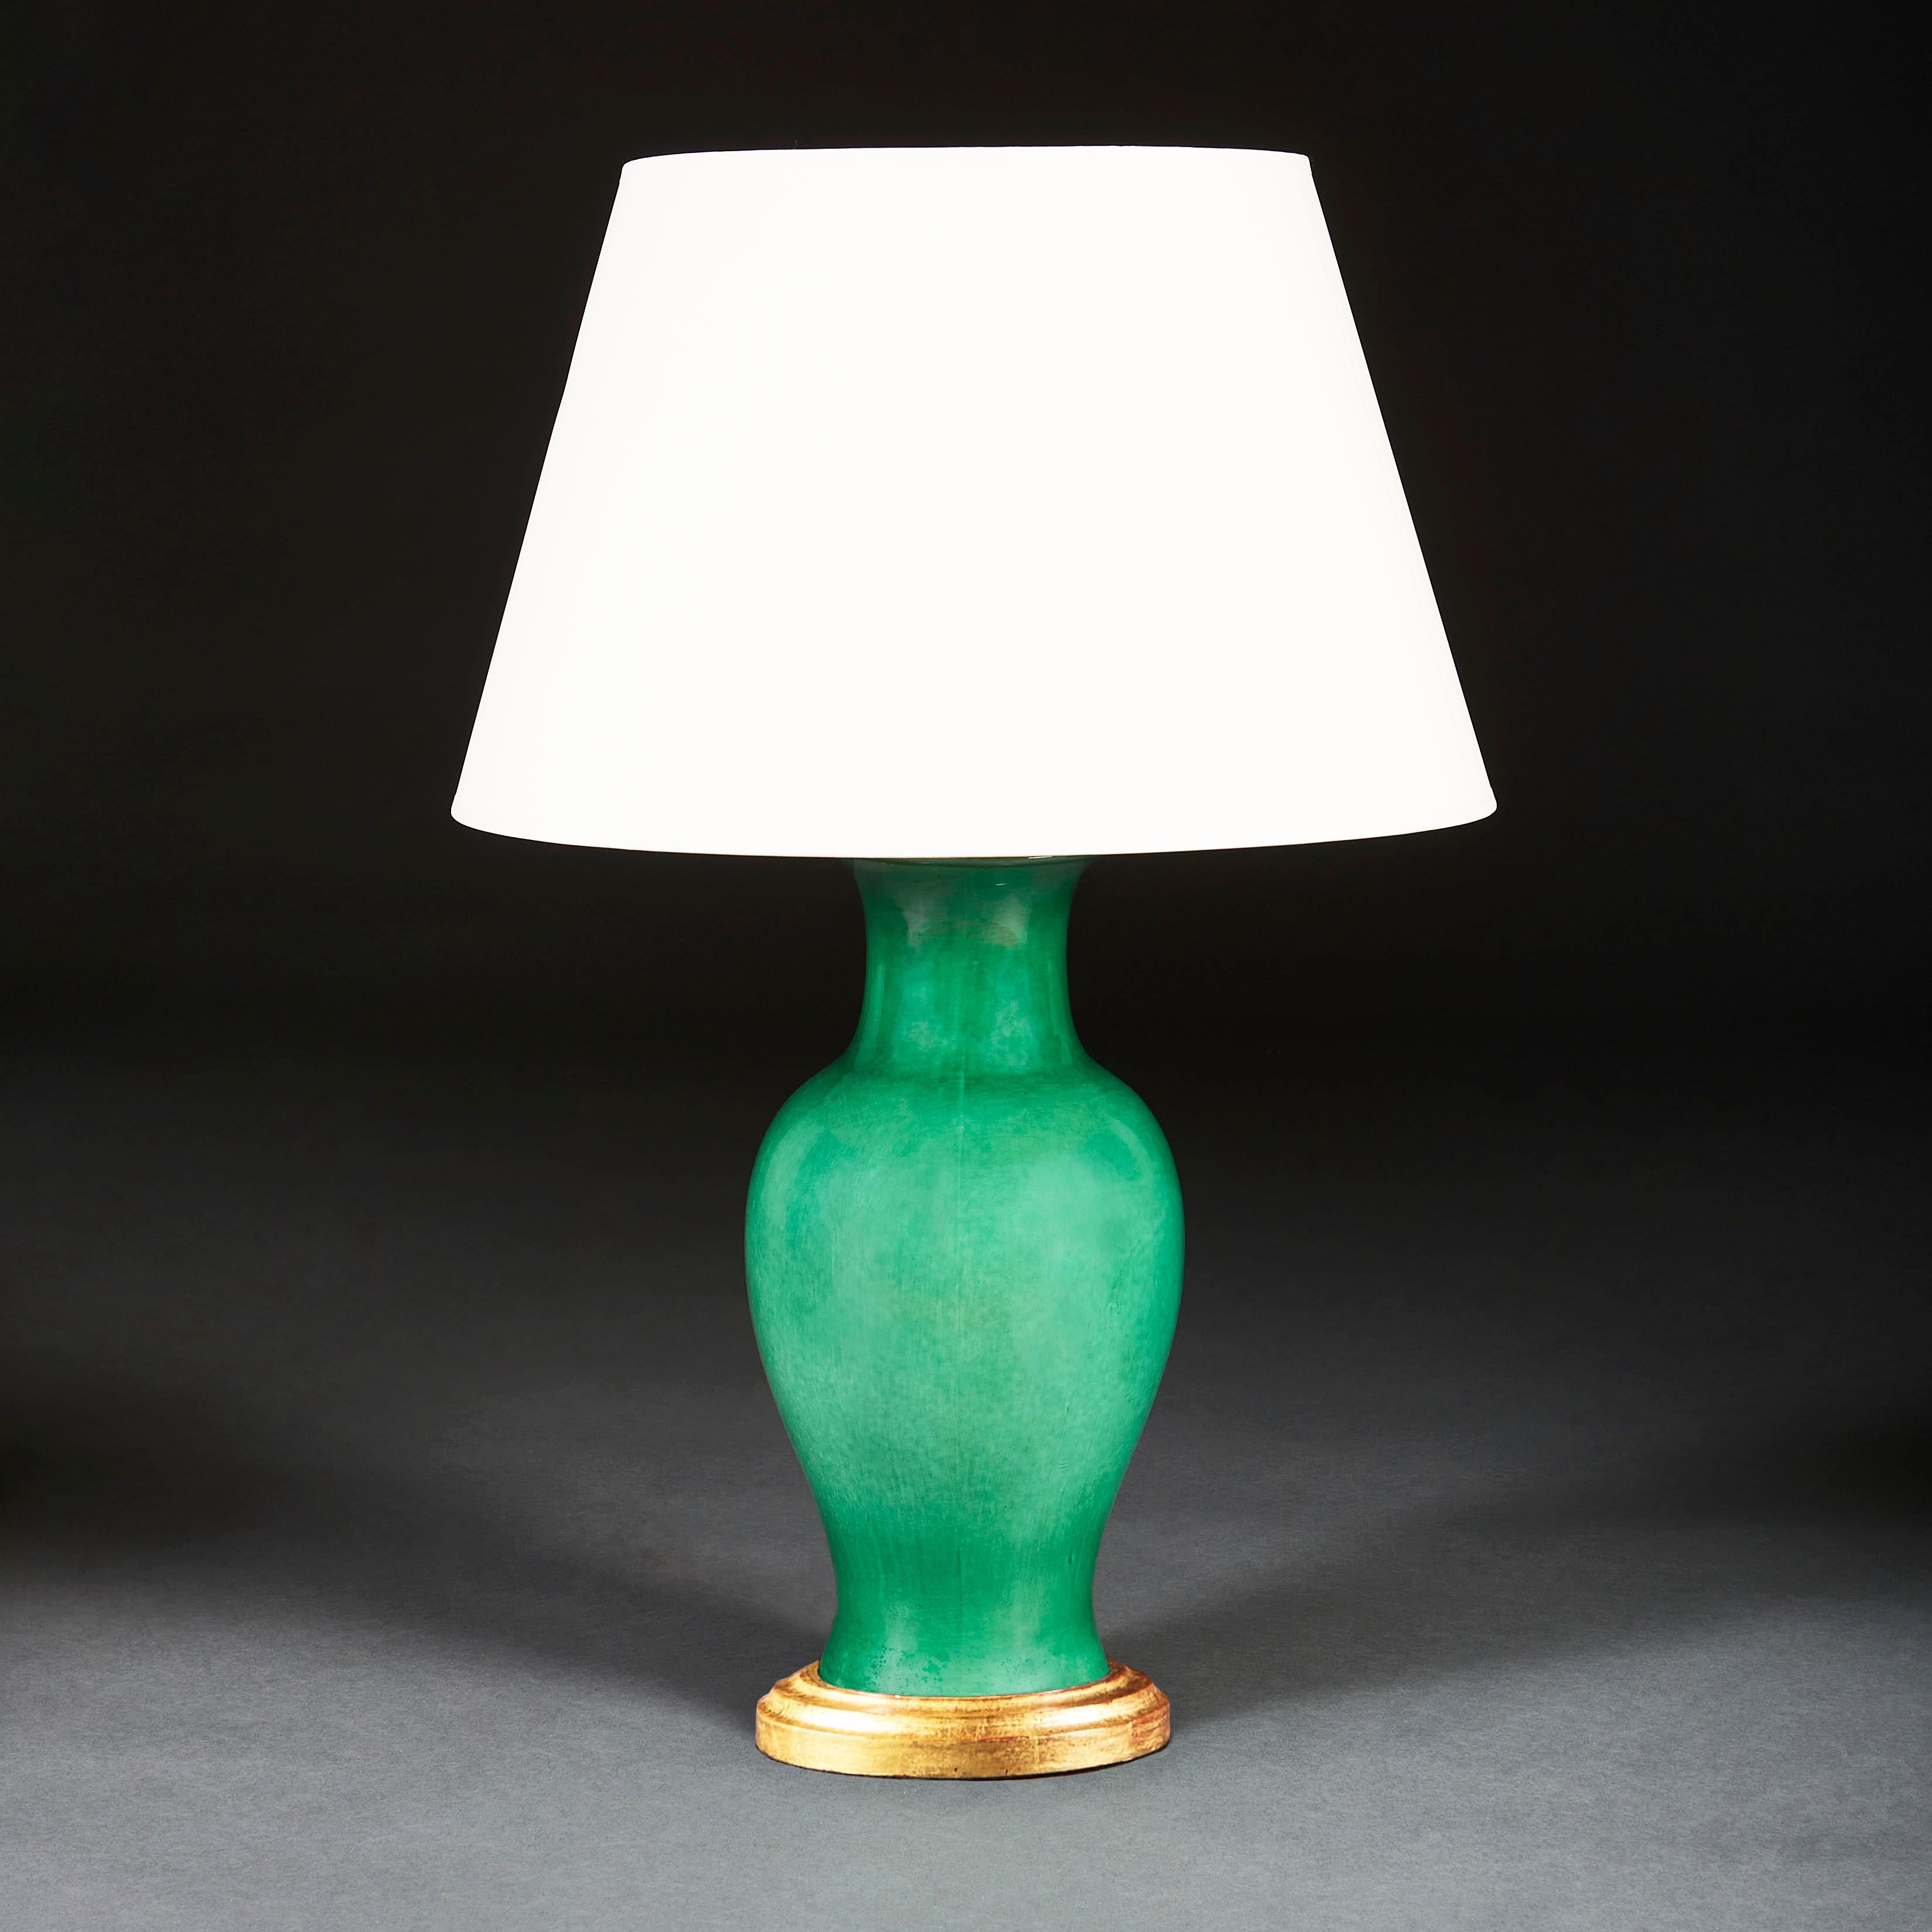 A large Chinese baluster form ceramic vase with apple green glaze, now mounted as a lamp with a turned giltwood base.

Please note: Lampshade not included.
  
Currently wired for the UK.